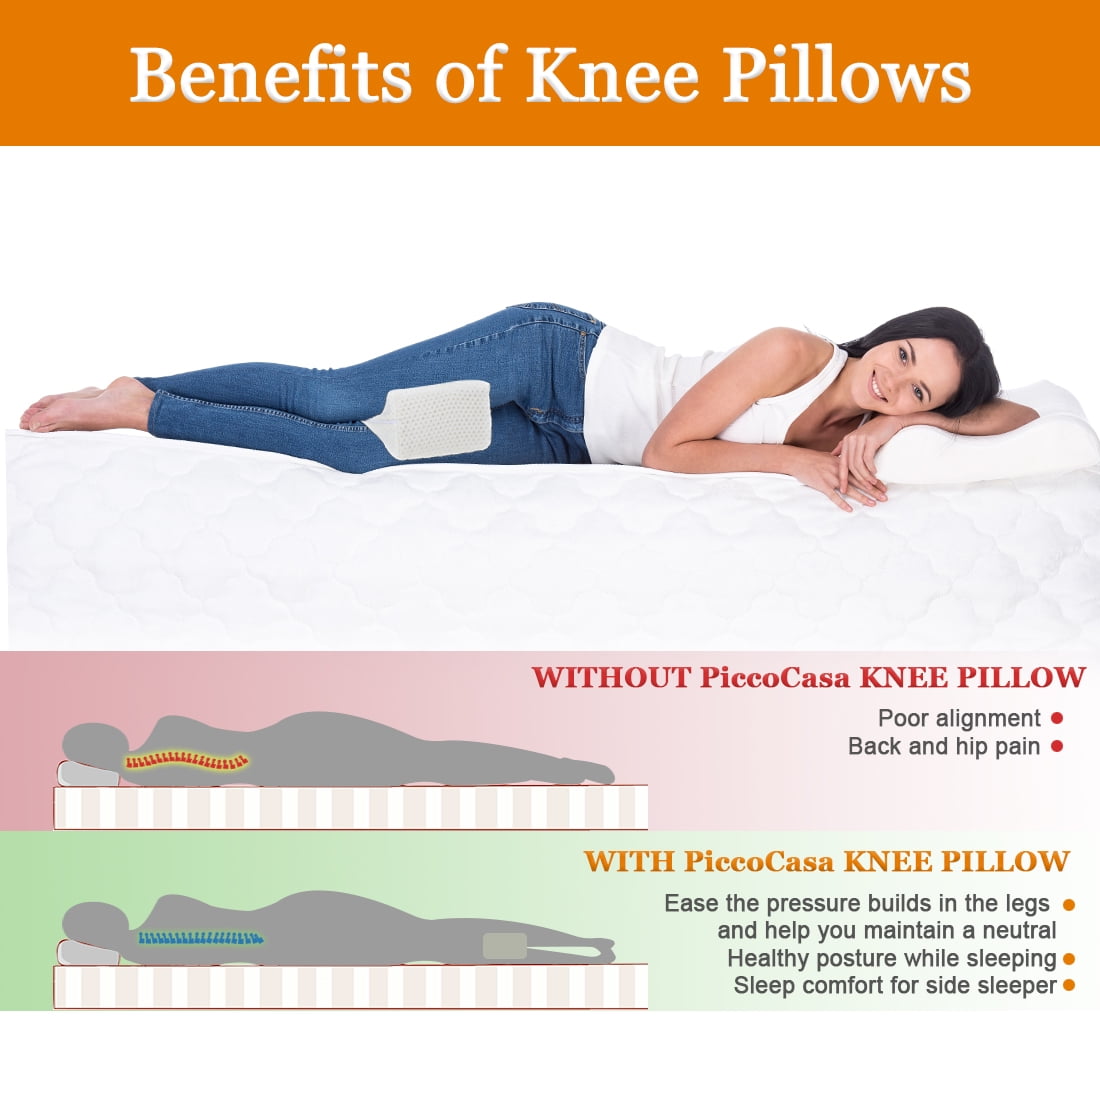  Nestl Knee Pillow for Side Sleepers - Knee Pillows for Sleeping  - Comfy Pillow Between Legs for Sleeping - Under Leg Knee Cushion with  Cooling Cover - Knee Surgery Pillow with